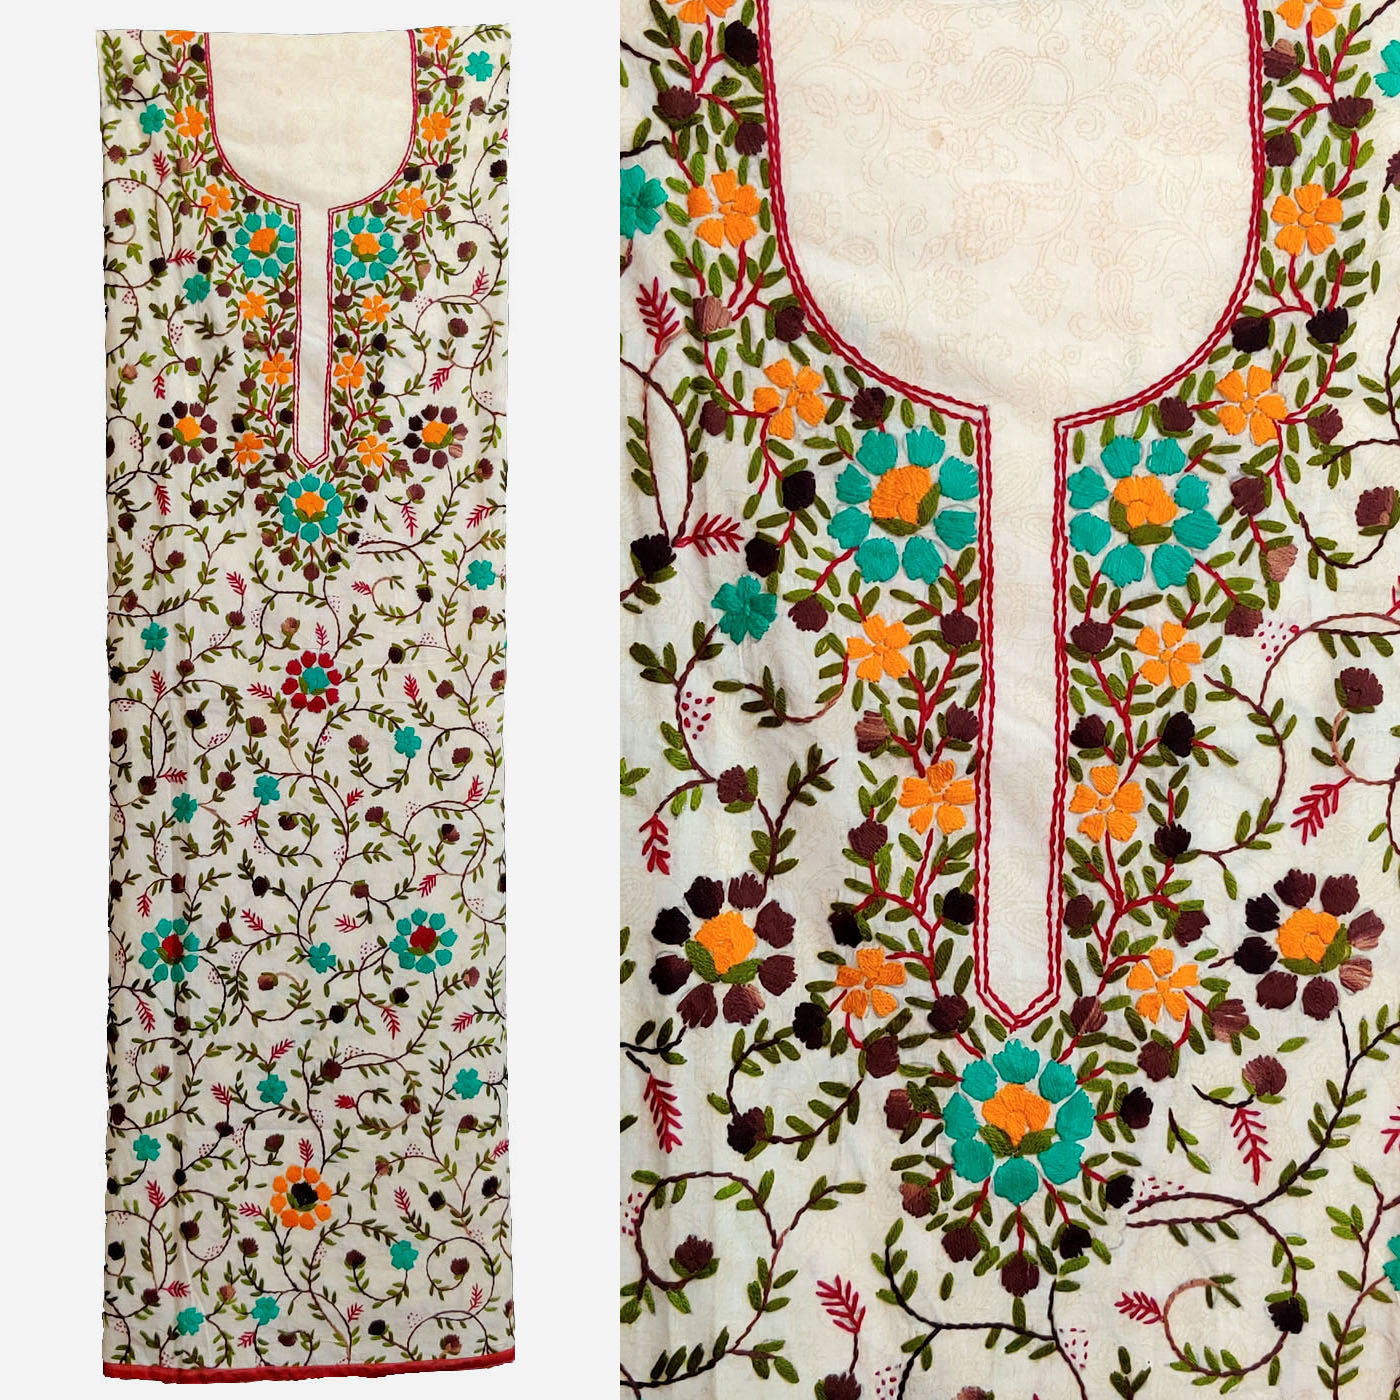 OFF WHITE-PEACOCK GREEN SELF PRINTED COTTON CUSTOM STITCHED HAND EMBROIDERED KURTI KURTA OR SALWAR KAMEEZ UP TO READY SIZE 52 (stitching included) LADIES DEN